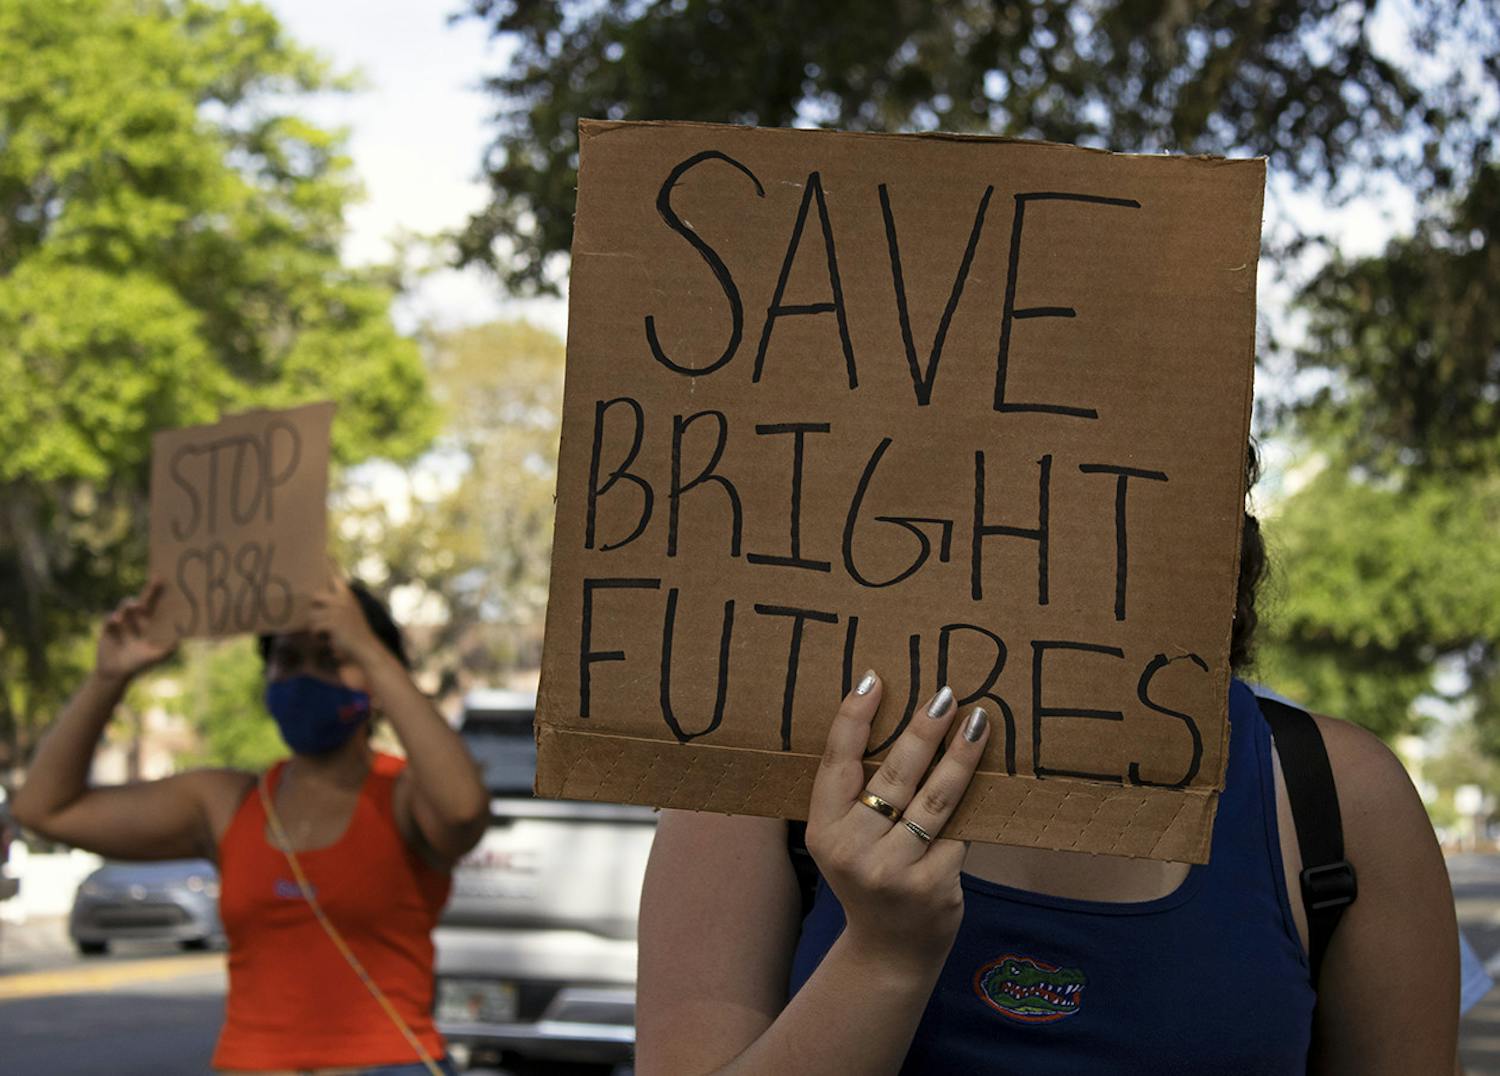 Aleidys Lopez (right), 19, a sustainability studies and women's studies sophomore shields her face from the sun with a "Save Bright Futures" sign as she and three other protestors march down University Avenue on Friday, March 26, 2021. The protest was held to raise awareness about Senate Bill 86, which was amended on Tuesday.